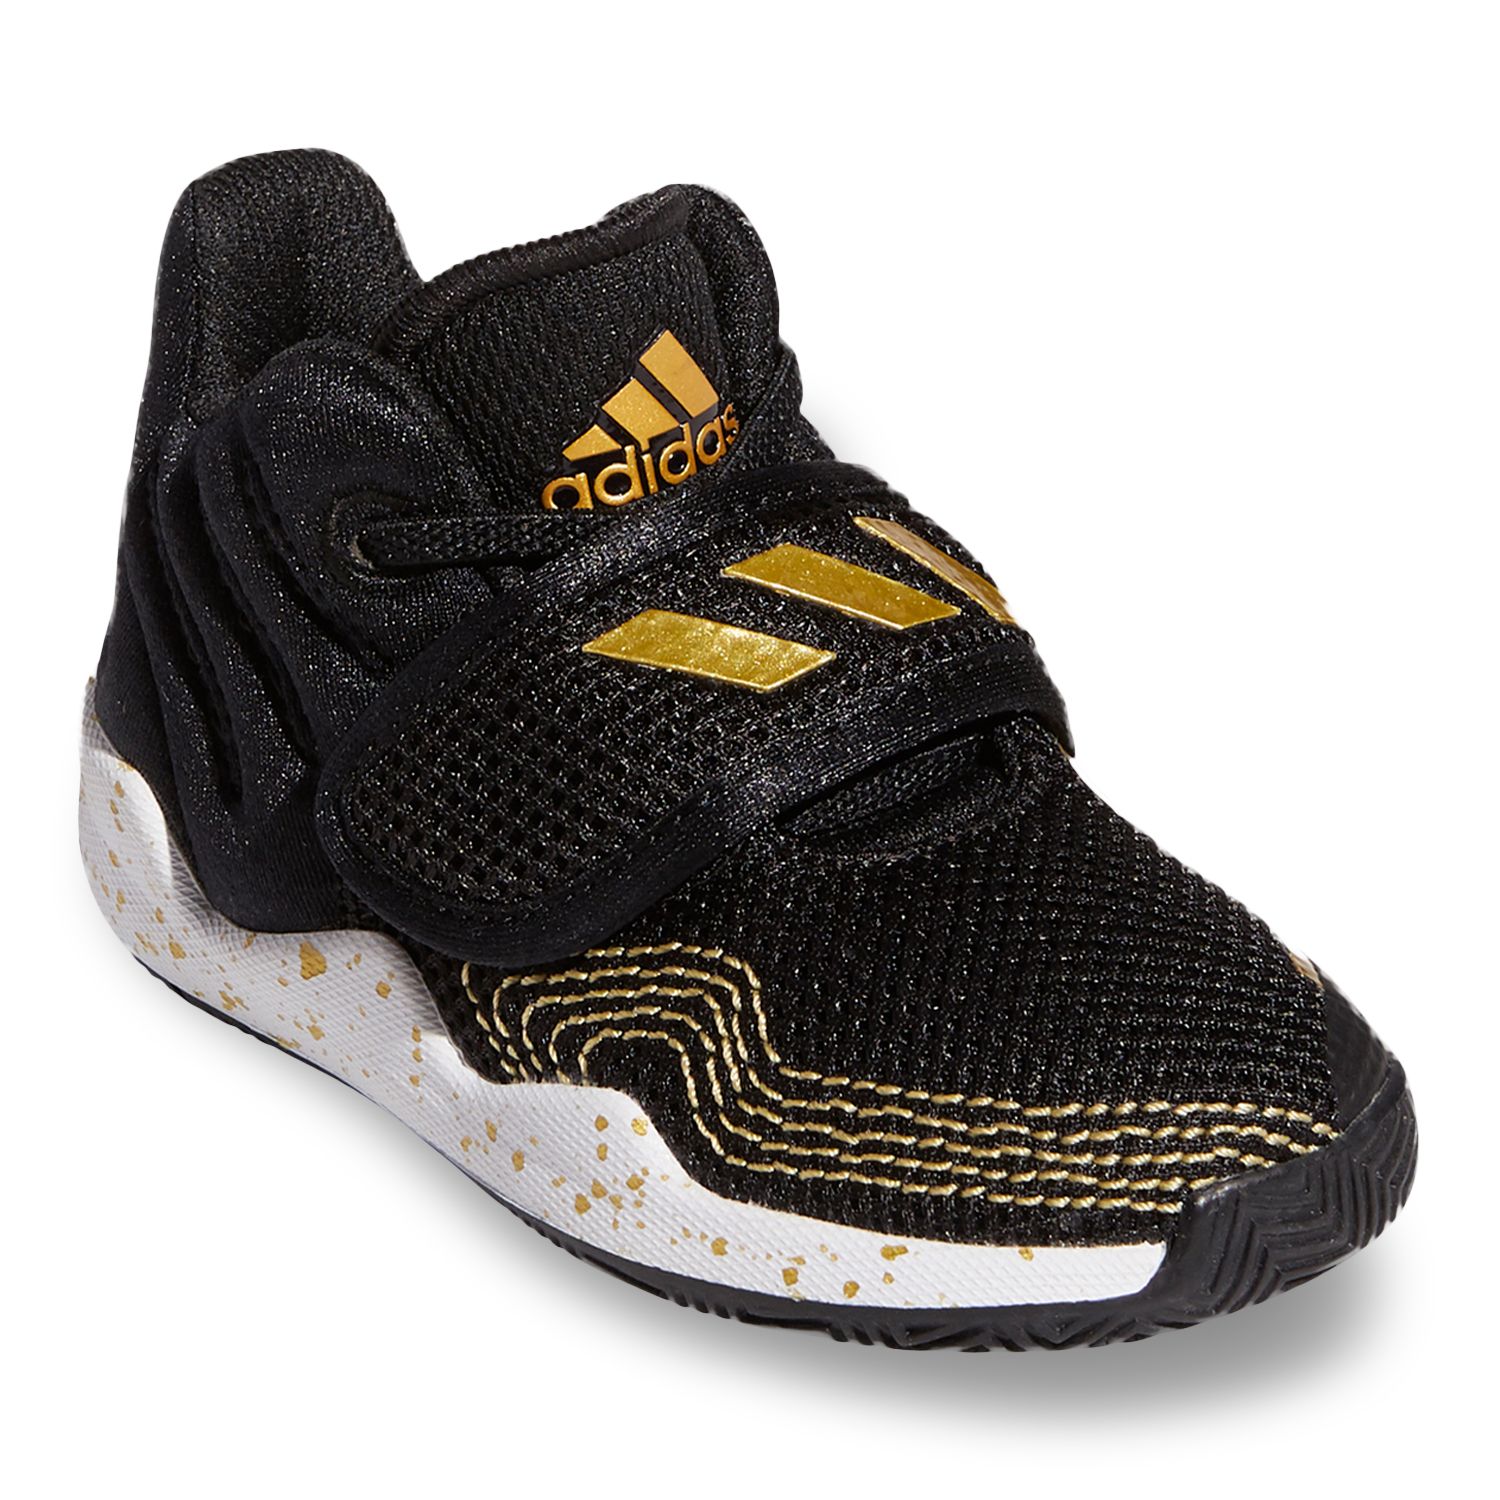 black and gold youth basketball shoes